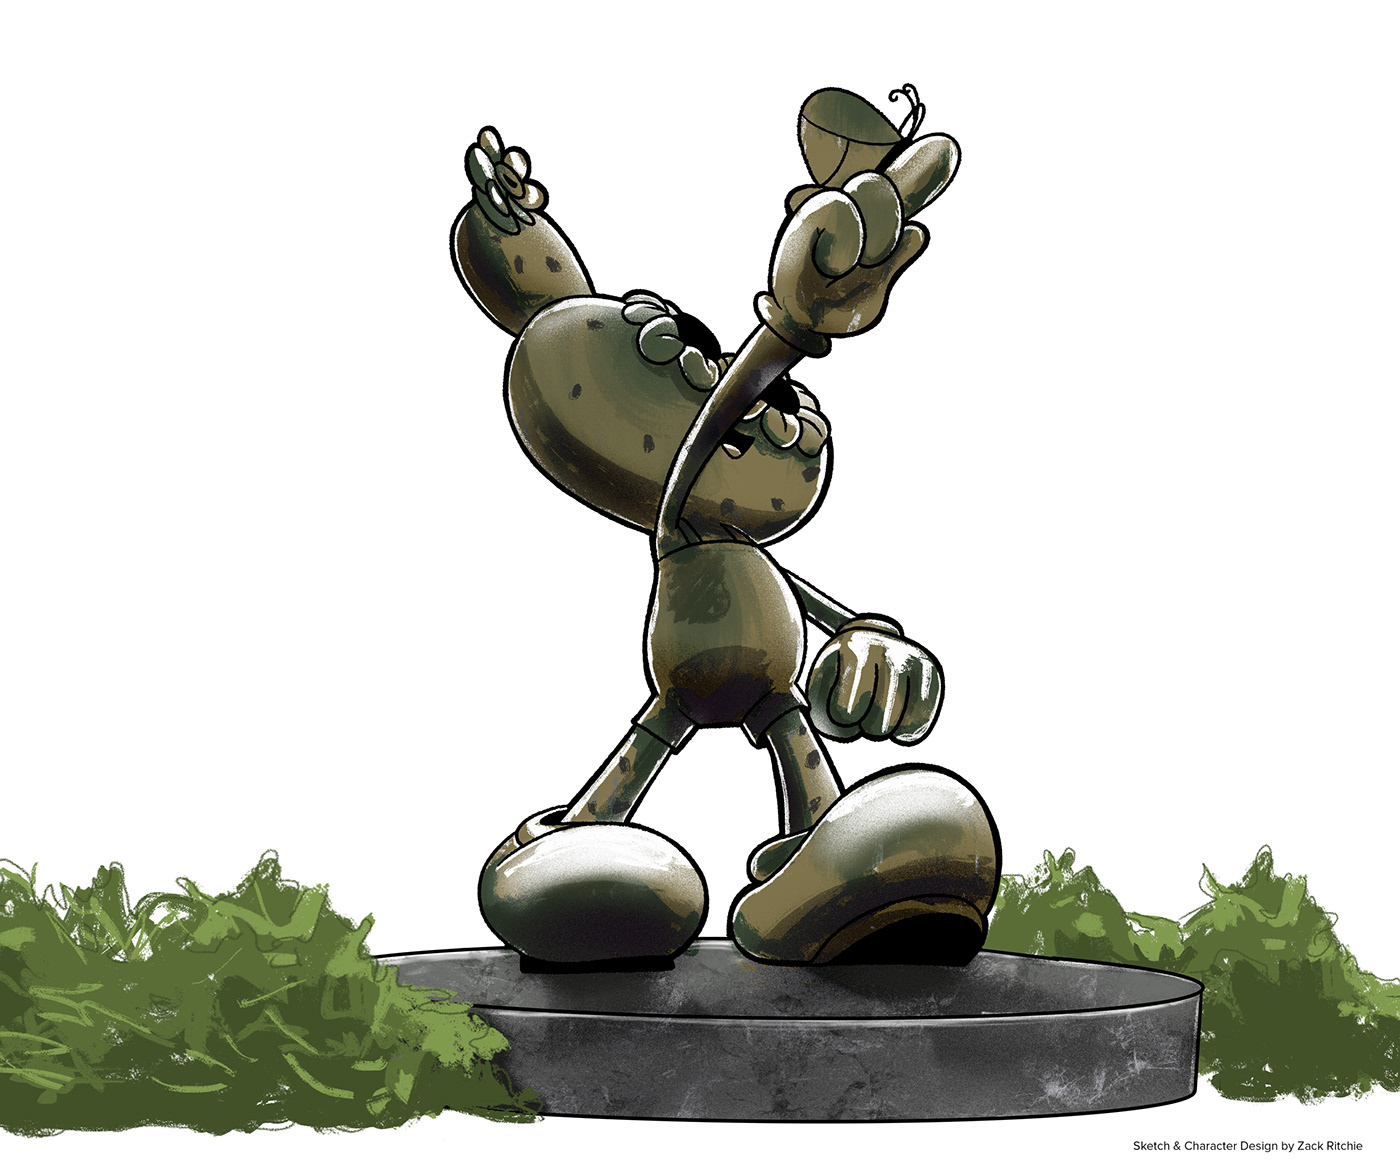 A artistic sketch from a bottom view of the 5m bronze cartoon character monument.